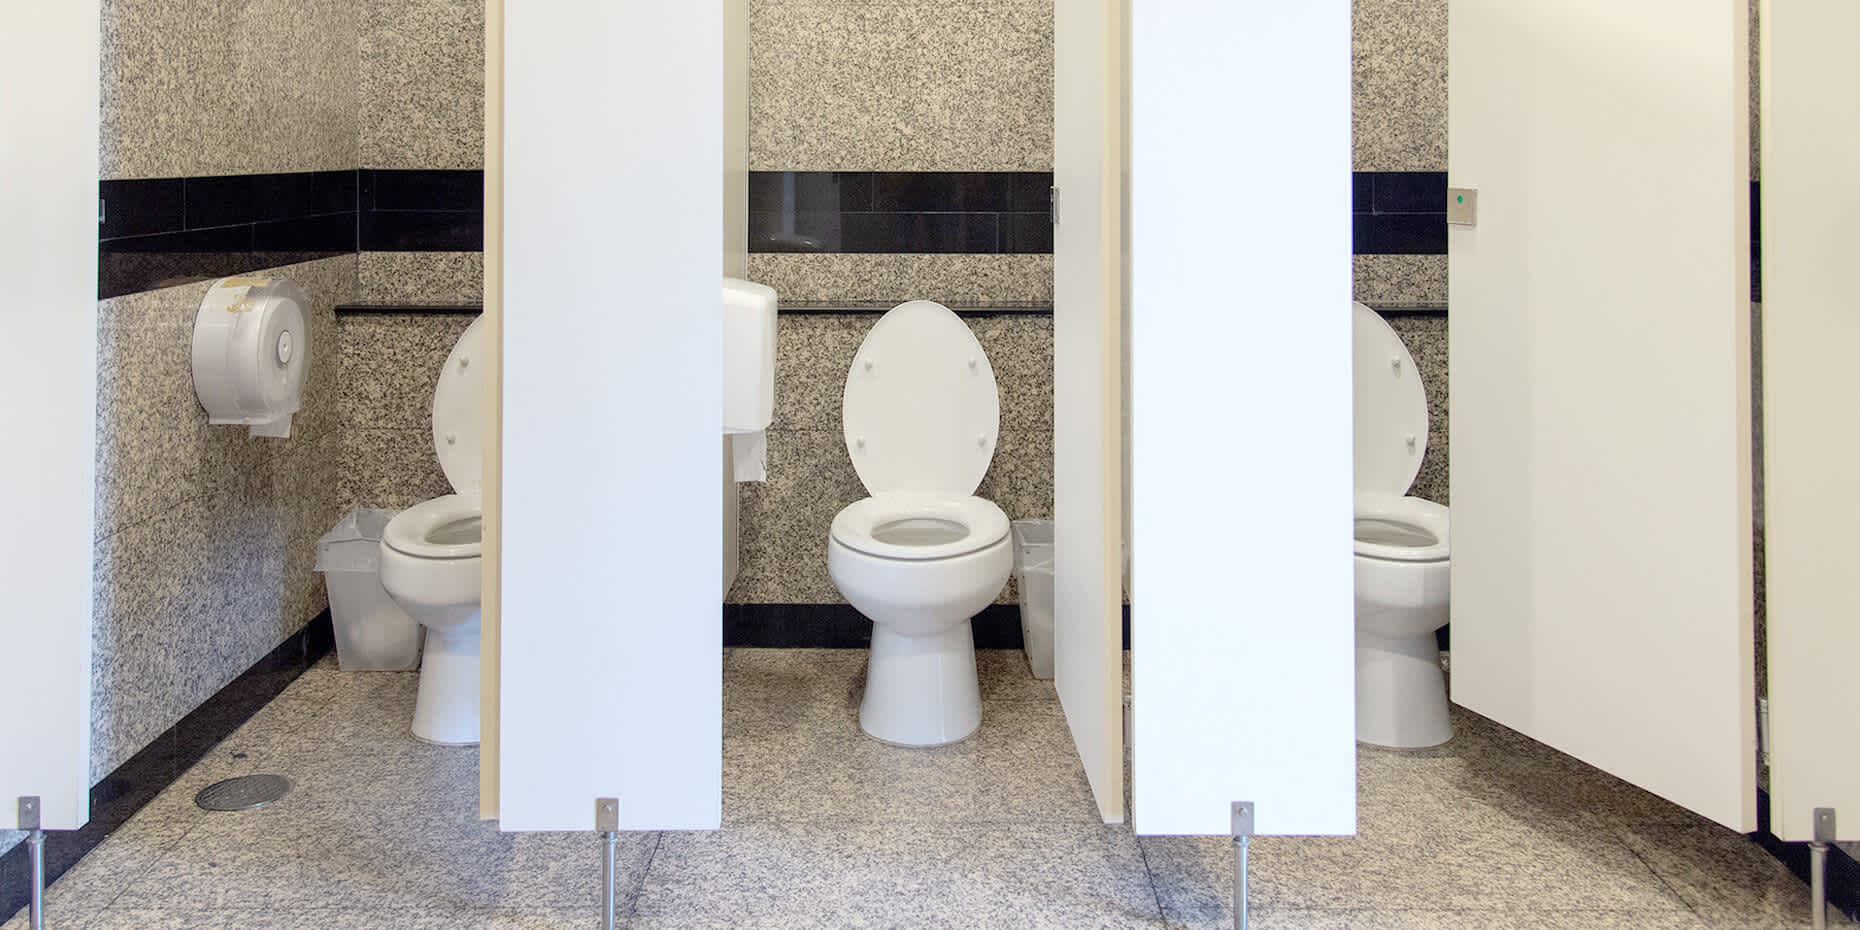 Bathroom stall toilet seats: can you get an STD from a toilet seat?